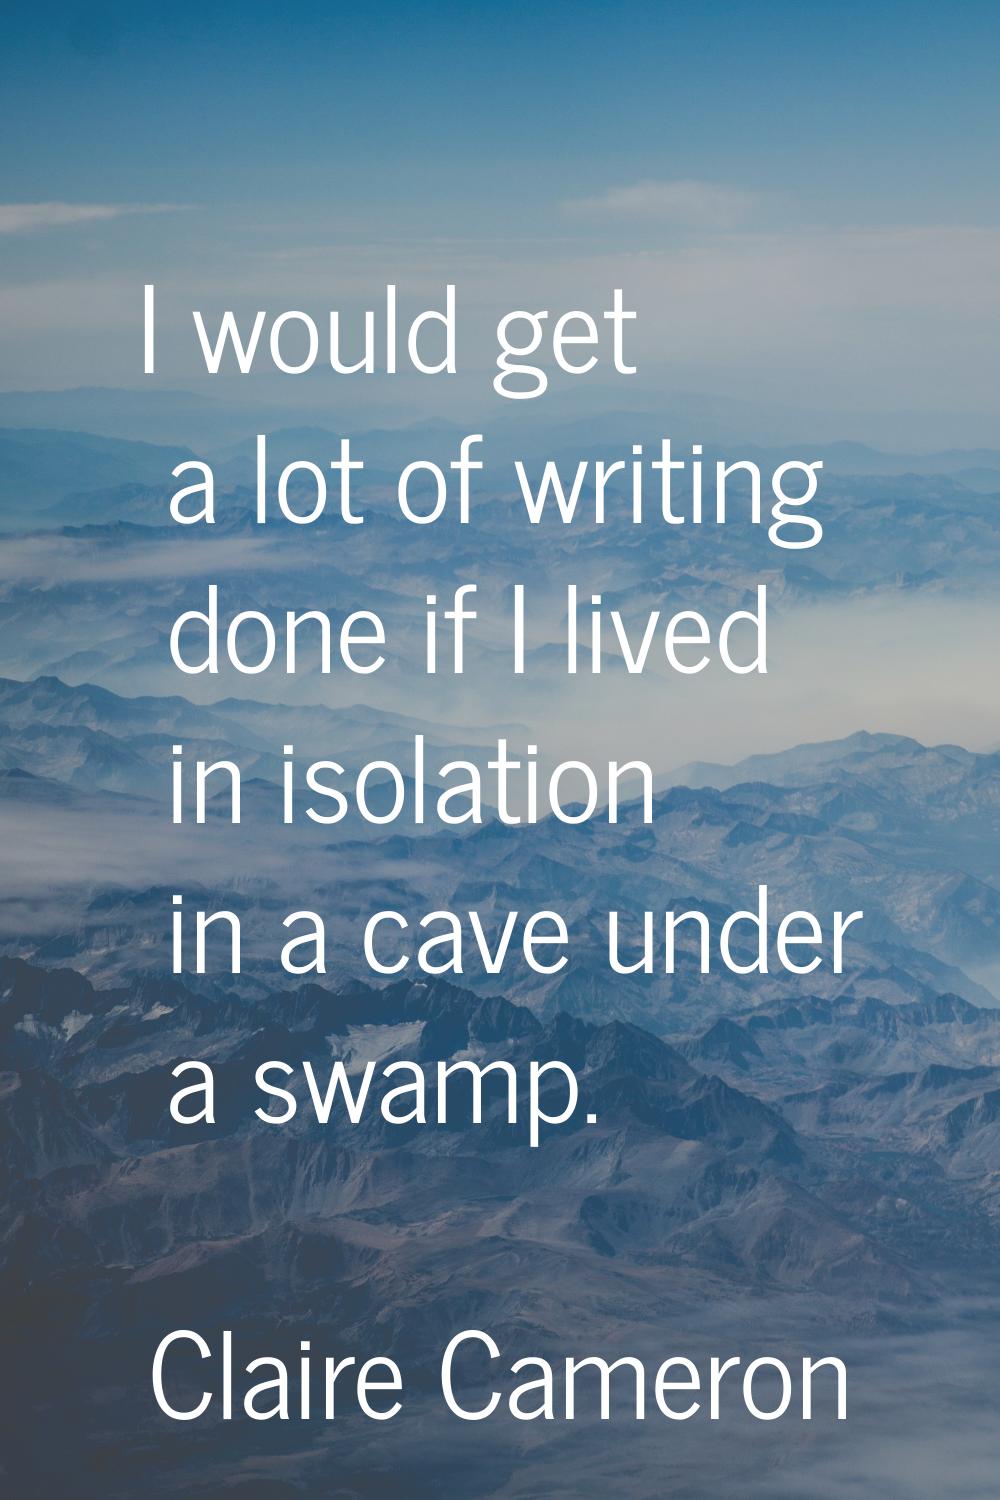 I would get a lot of writing done if I lived in isolation in a cave under a swamp.